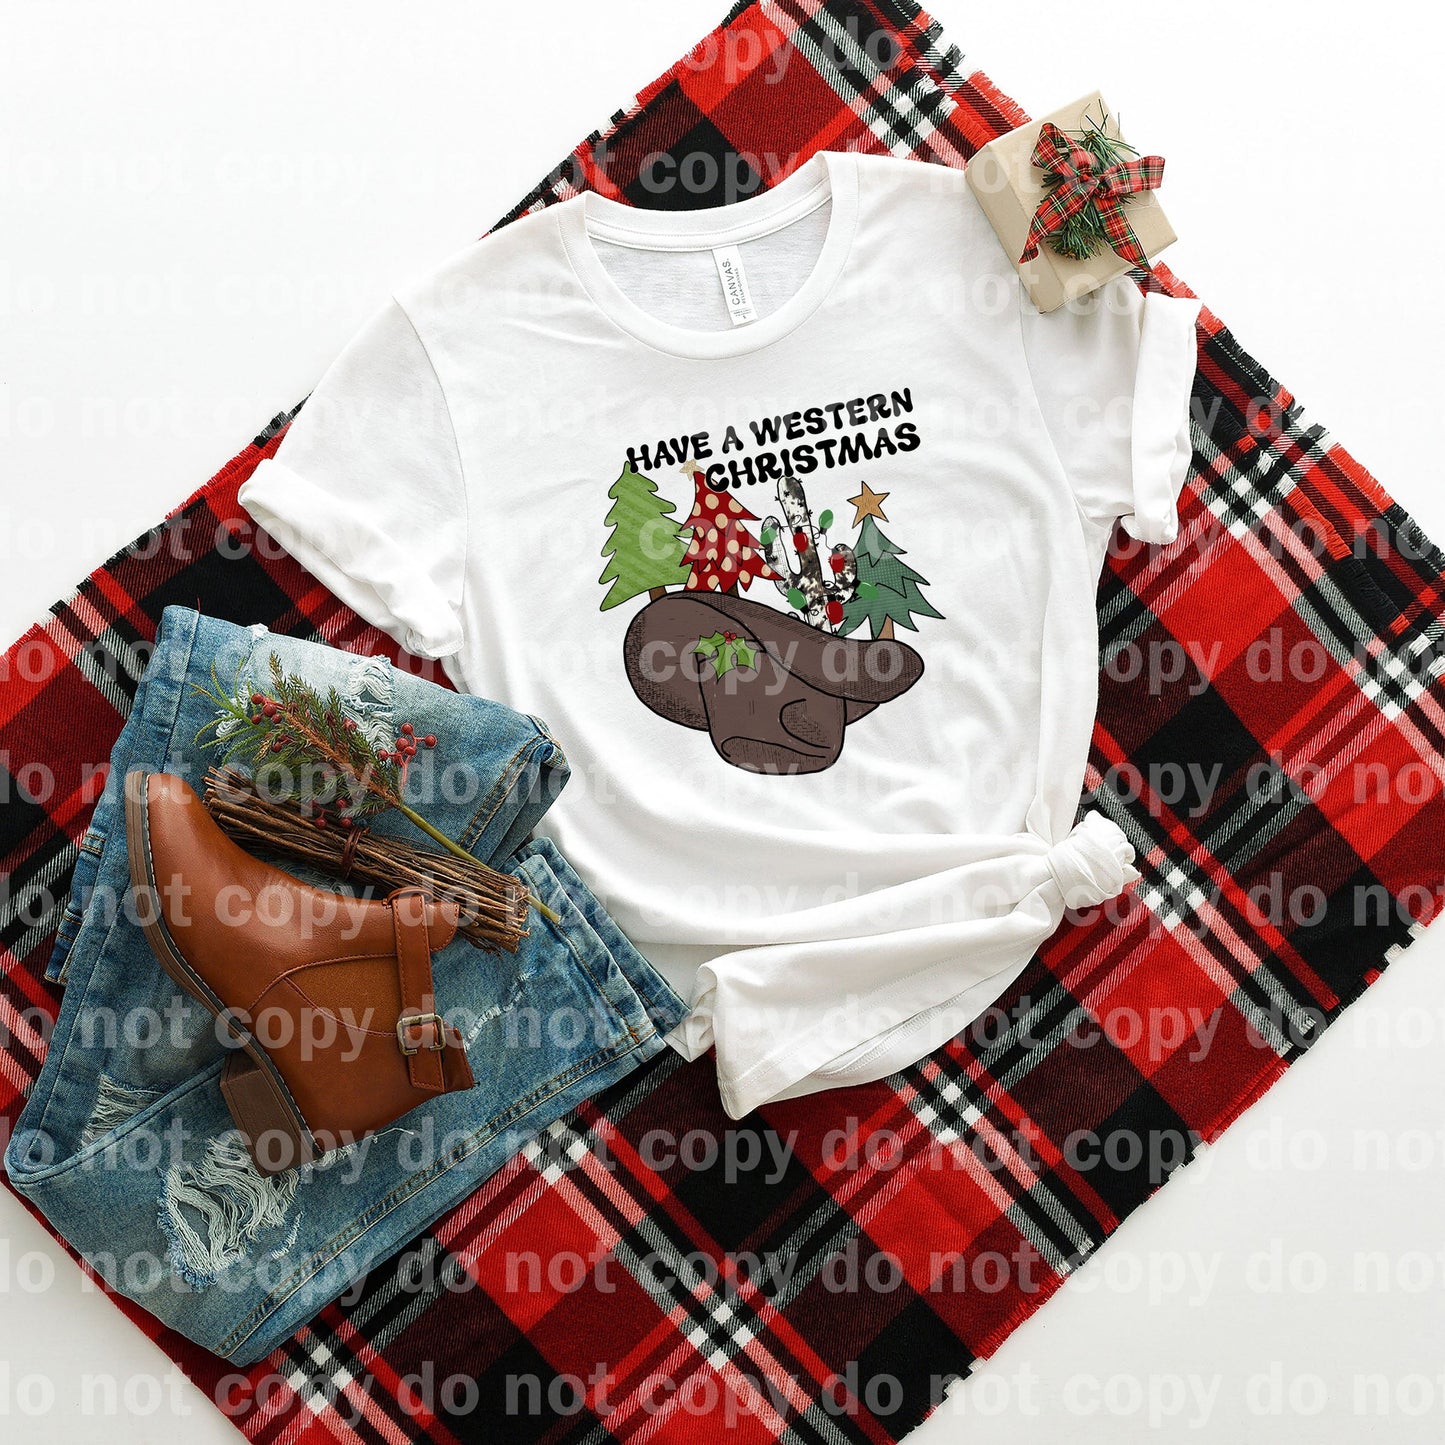 Have A Western Christmas Dream Print or Sublimation Print